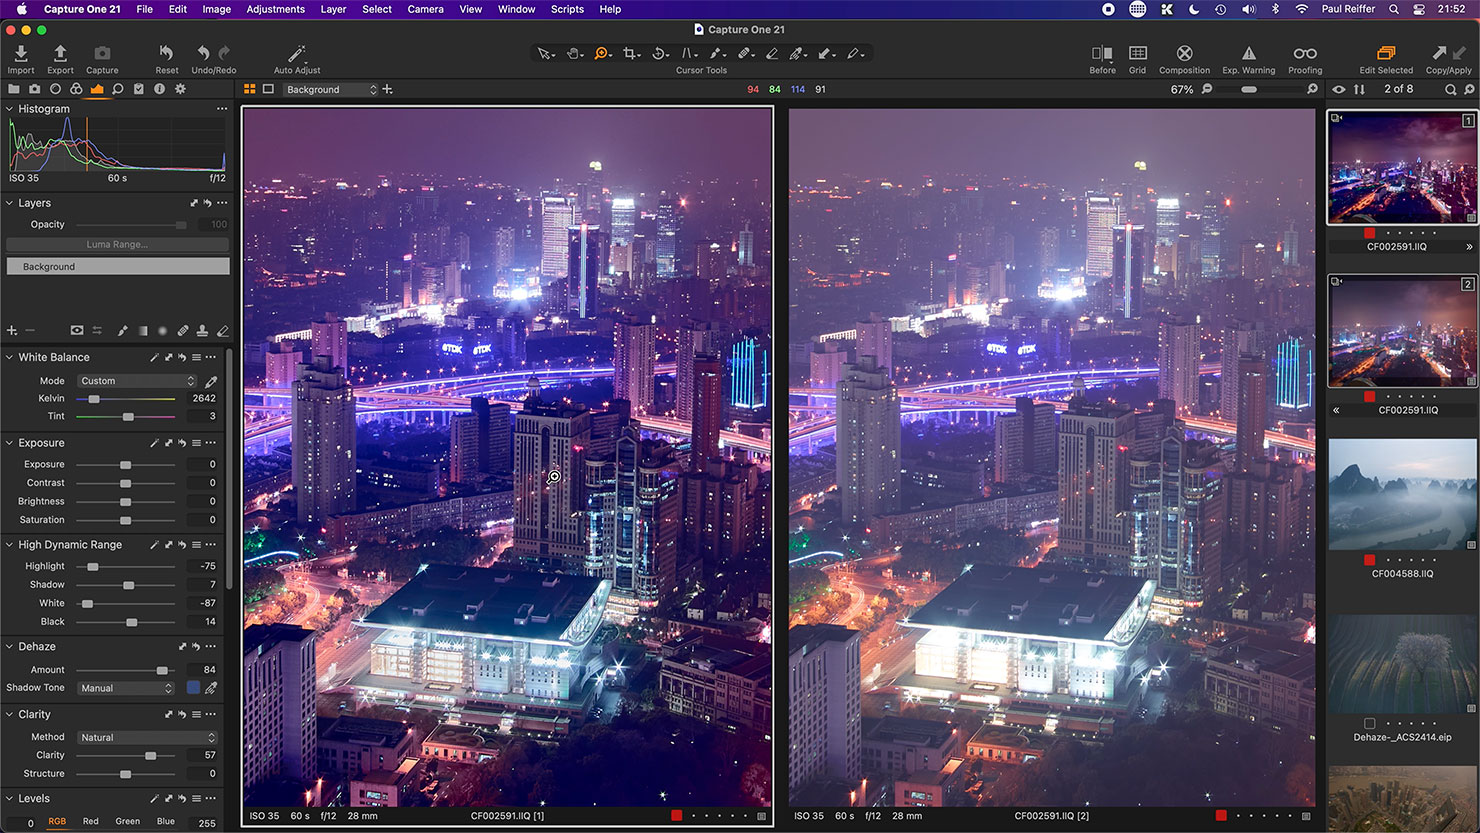 Dehaze City Cityscape Tool Clarity Levels Hdr Capture One 21 Upgrade How To Review Update Features New Release Paul Reiffer Photographer Edit Raw Version